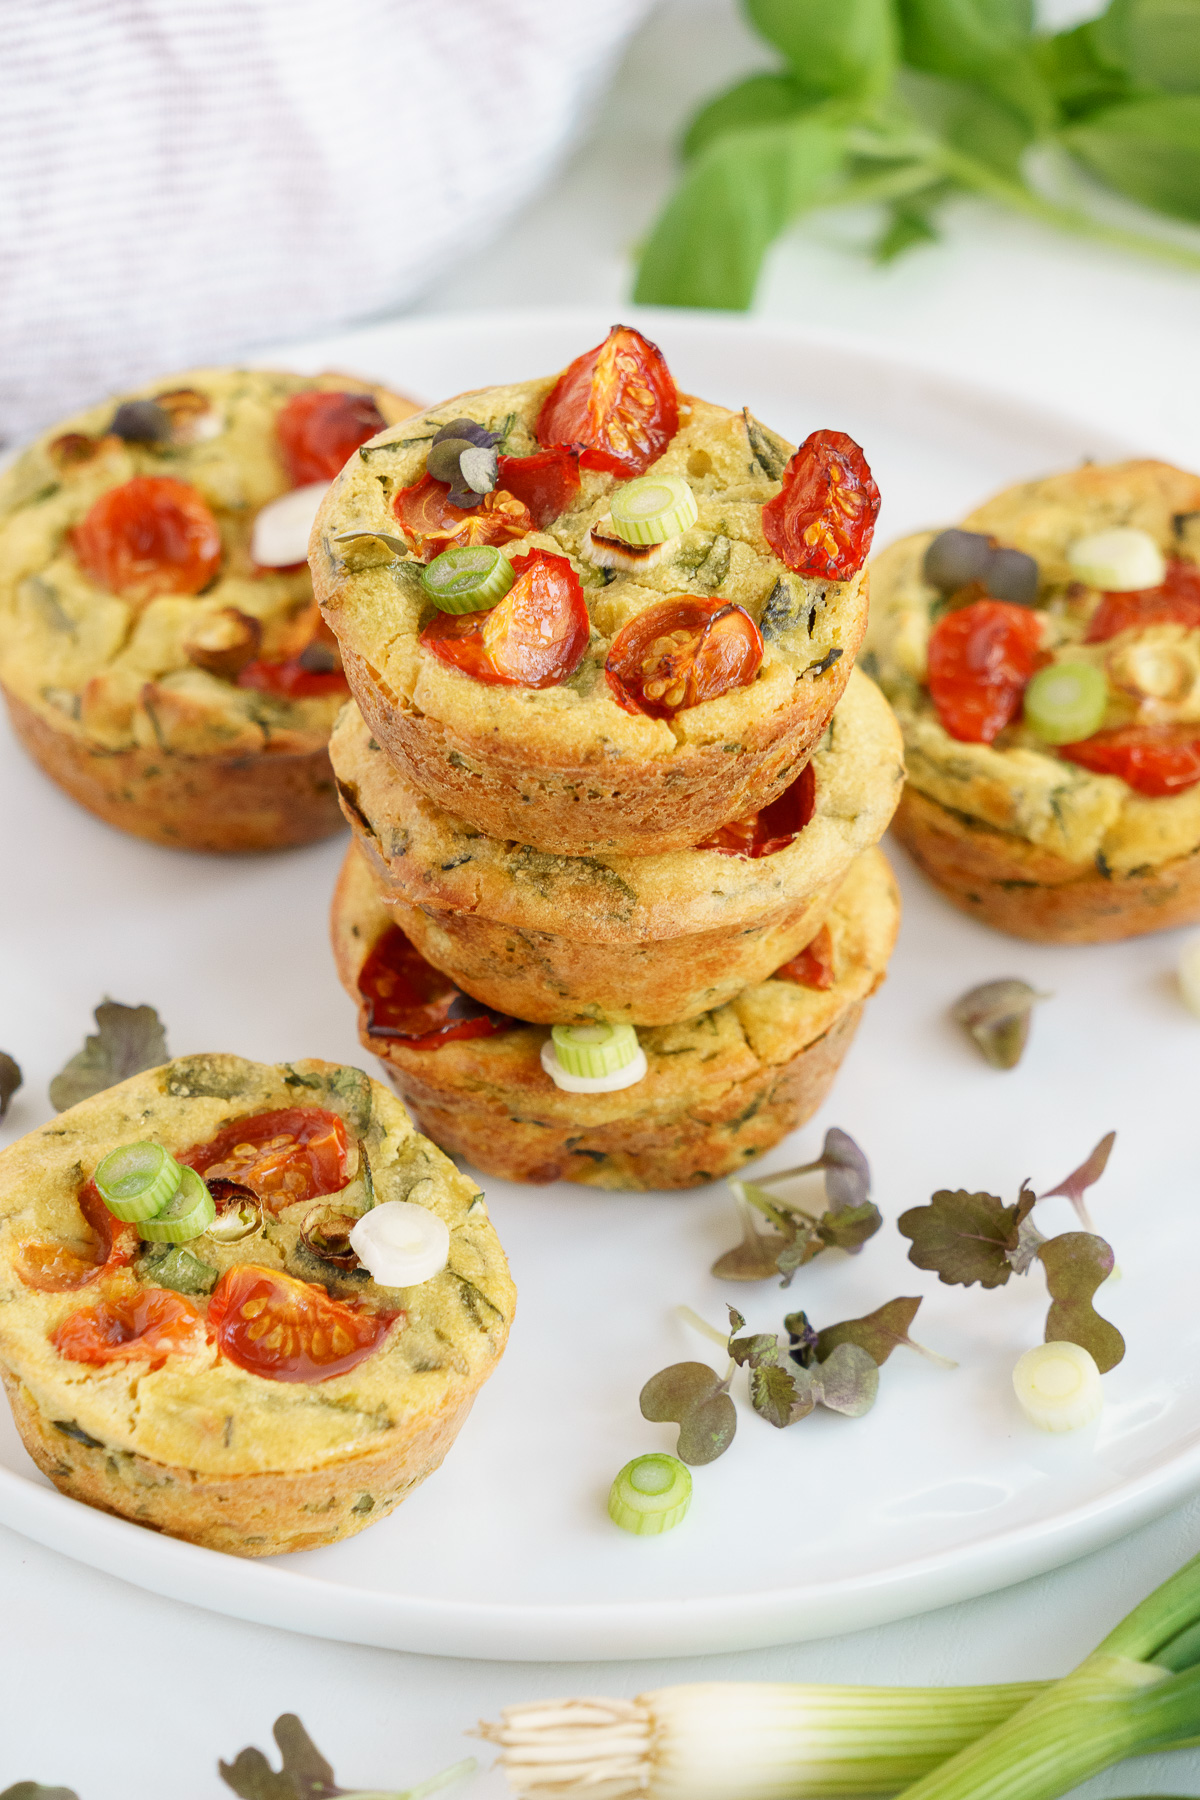 A stack of vegan egg muffins on a plate.